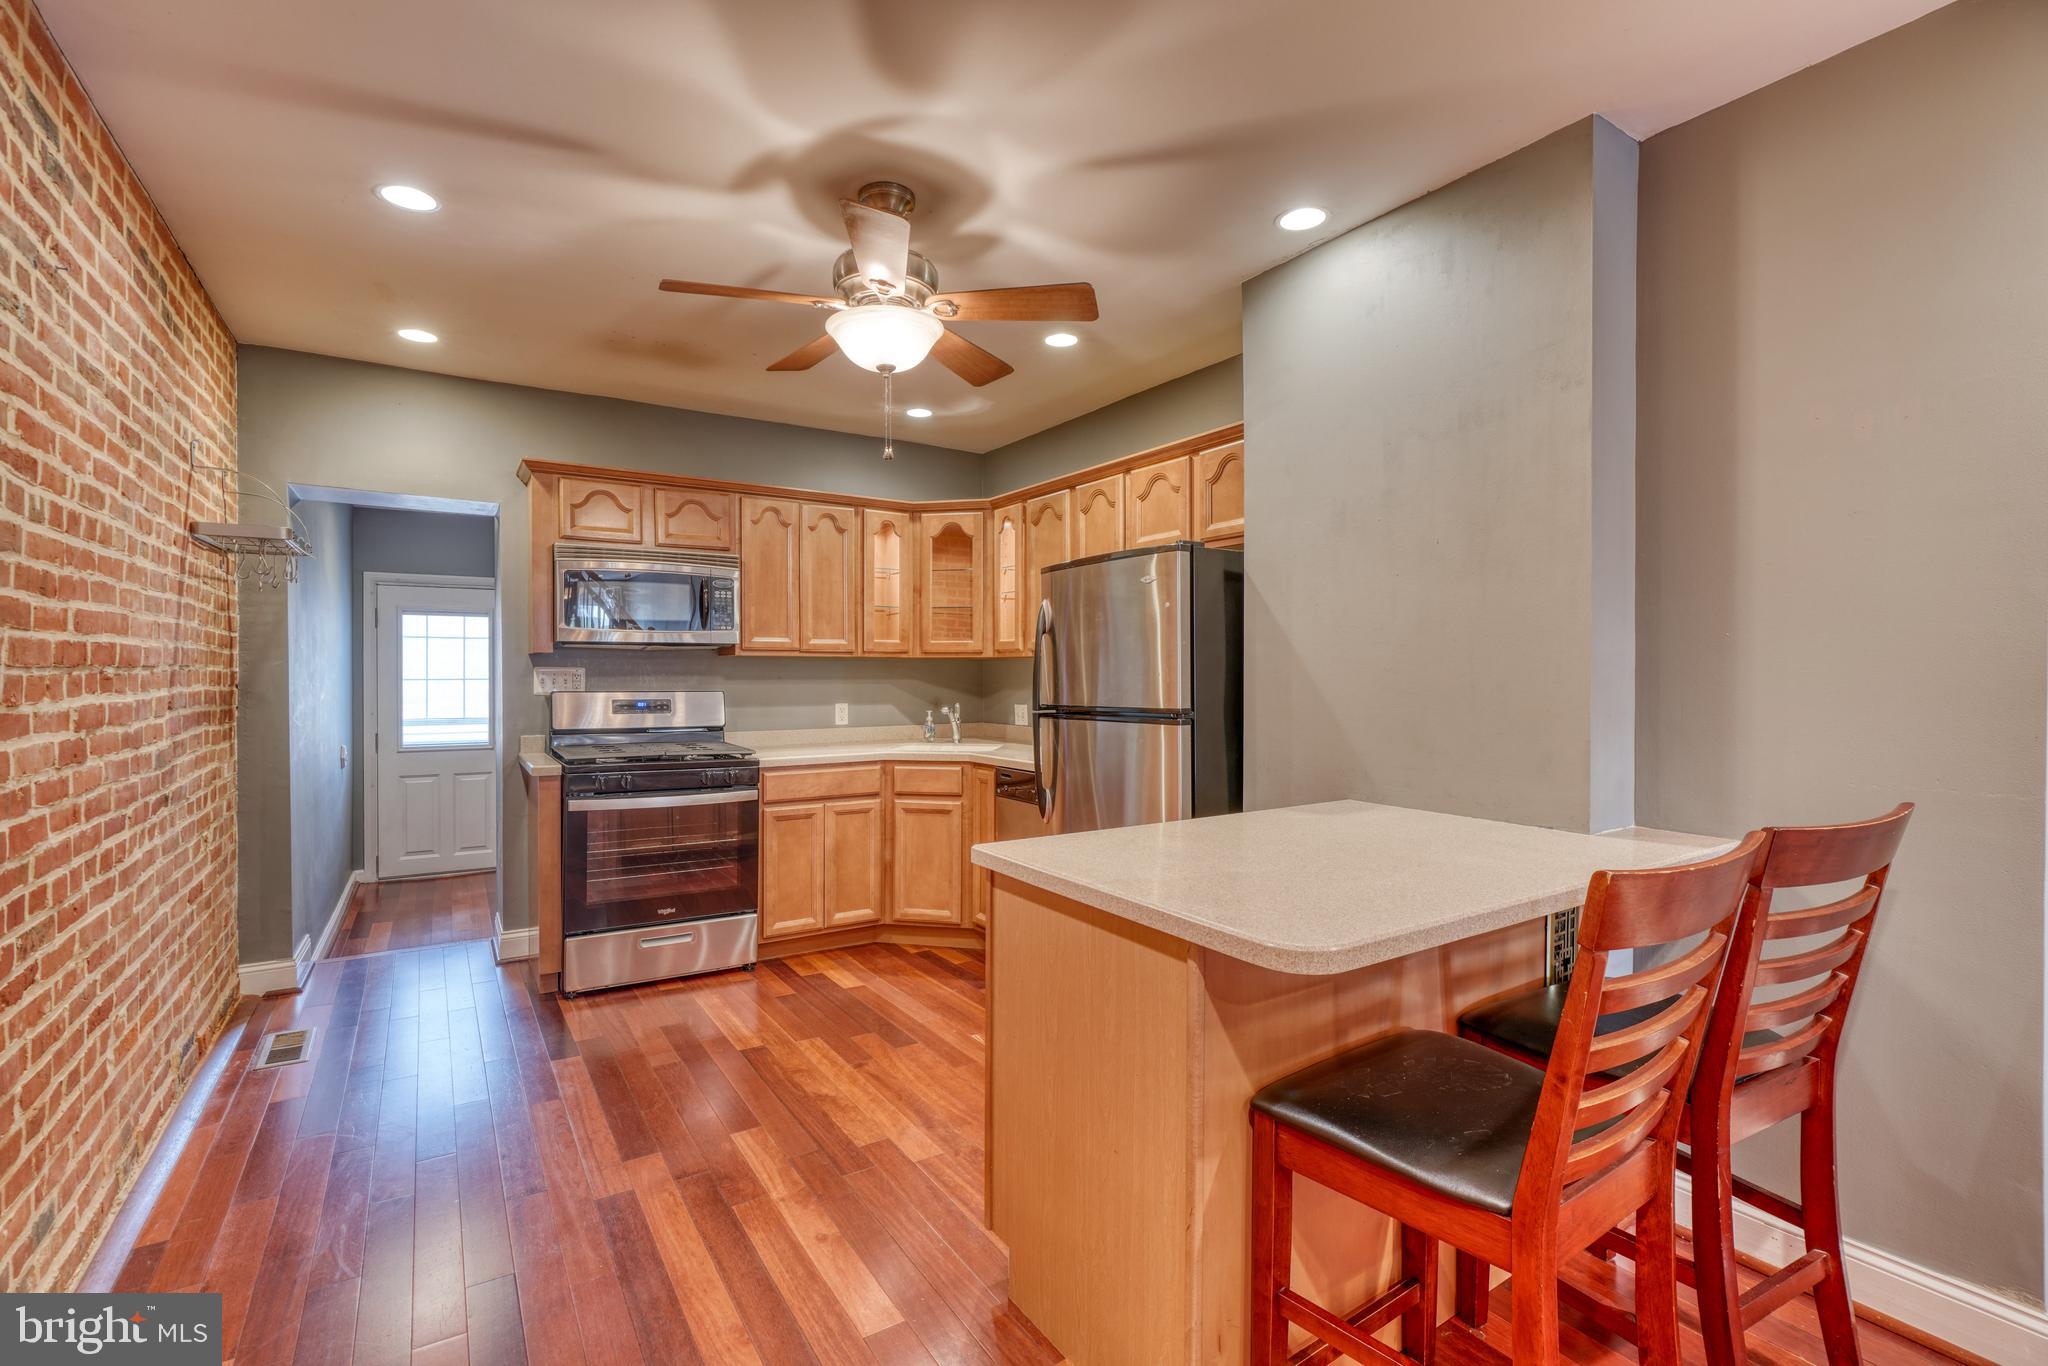 a kitchen with stainless steel appliances kitchen island granite countertop a refrigerator a stove top oven a sink dishwasher and white countertops with wooden floor